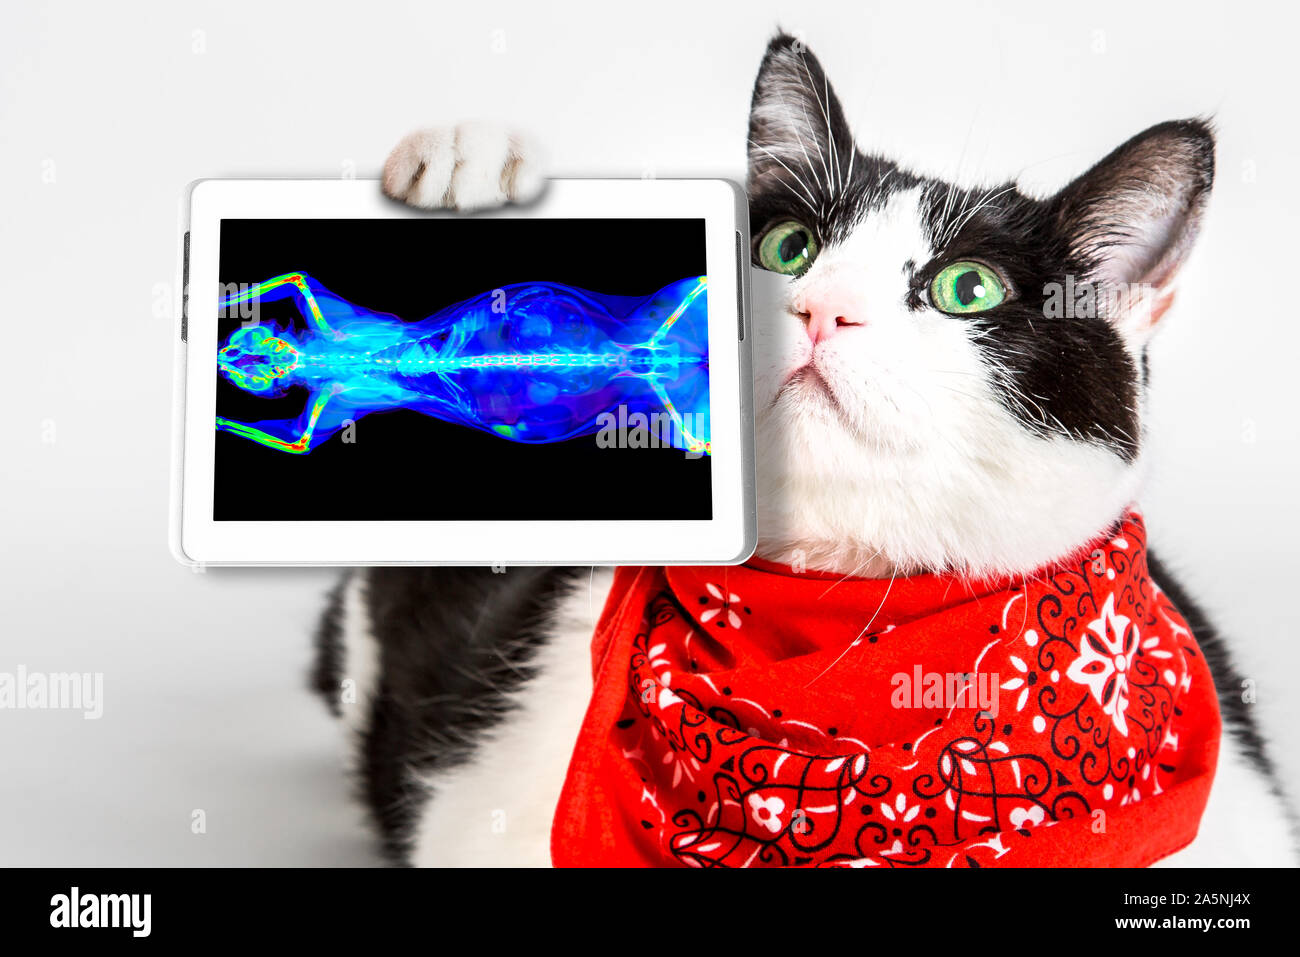 black and white cat with green eyes, wearing a red bandana, showing its ct scan in a tablet. White studio background. oncologist veterinary diagnostic Stock Photo